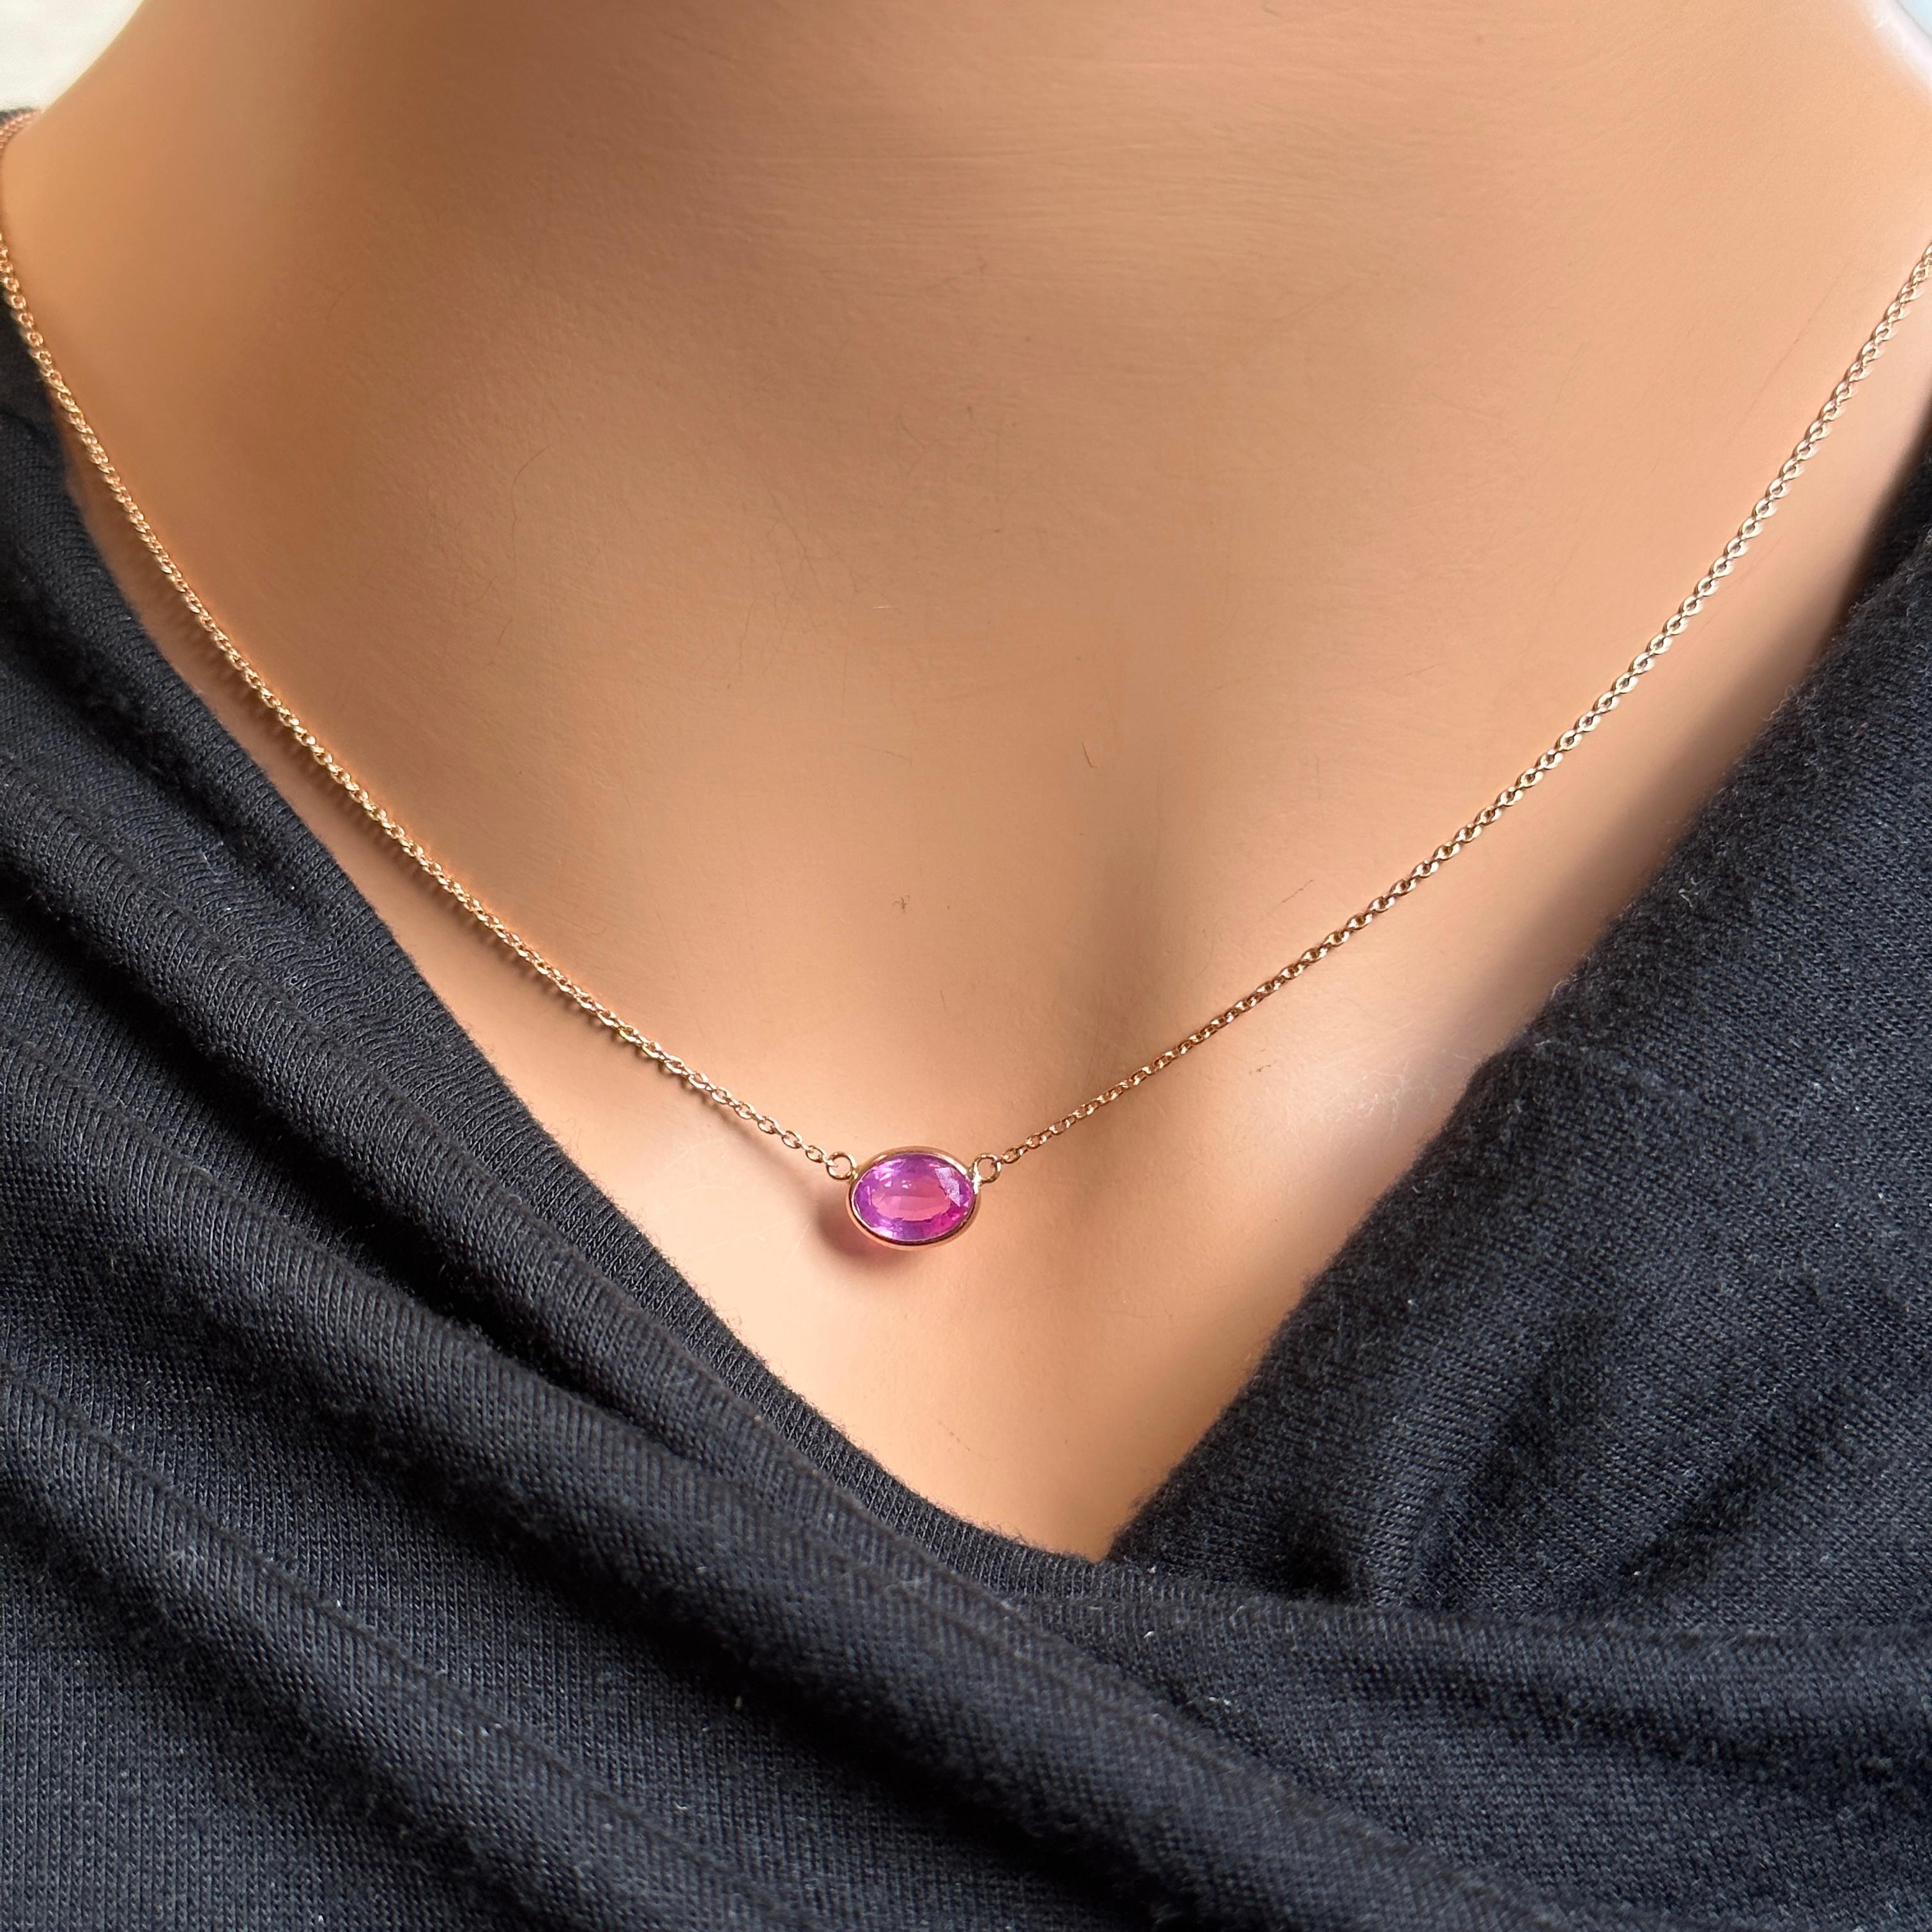 A fashion necklace crafted in 14k rose gold with a main stone of a certified oval-cut pink sapphire weighing 1.74 carats would be a stunning and elegant choice. Pink sapphires are renowned for their delicate and romantic color, and the oval cut adds